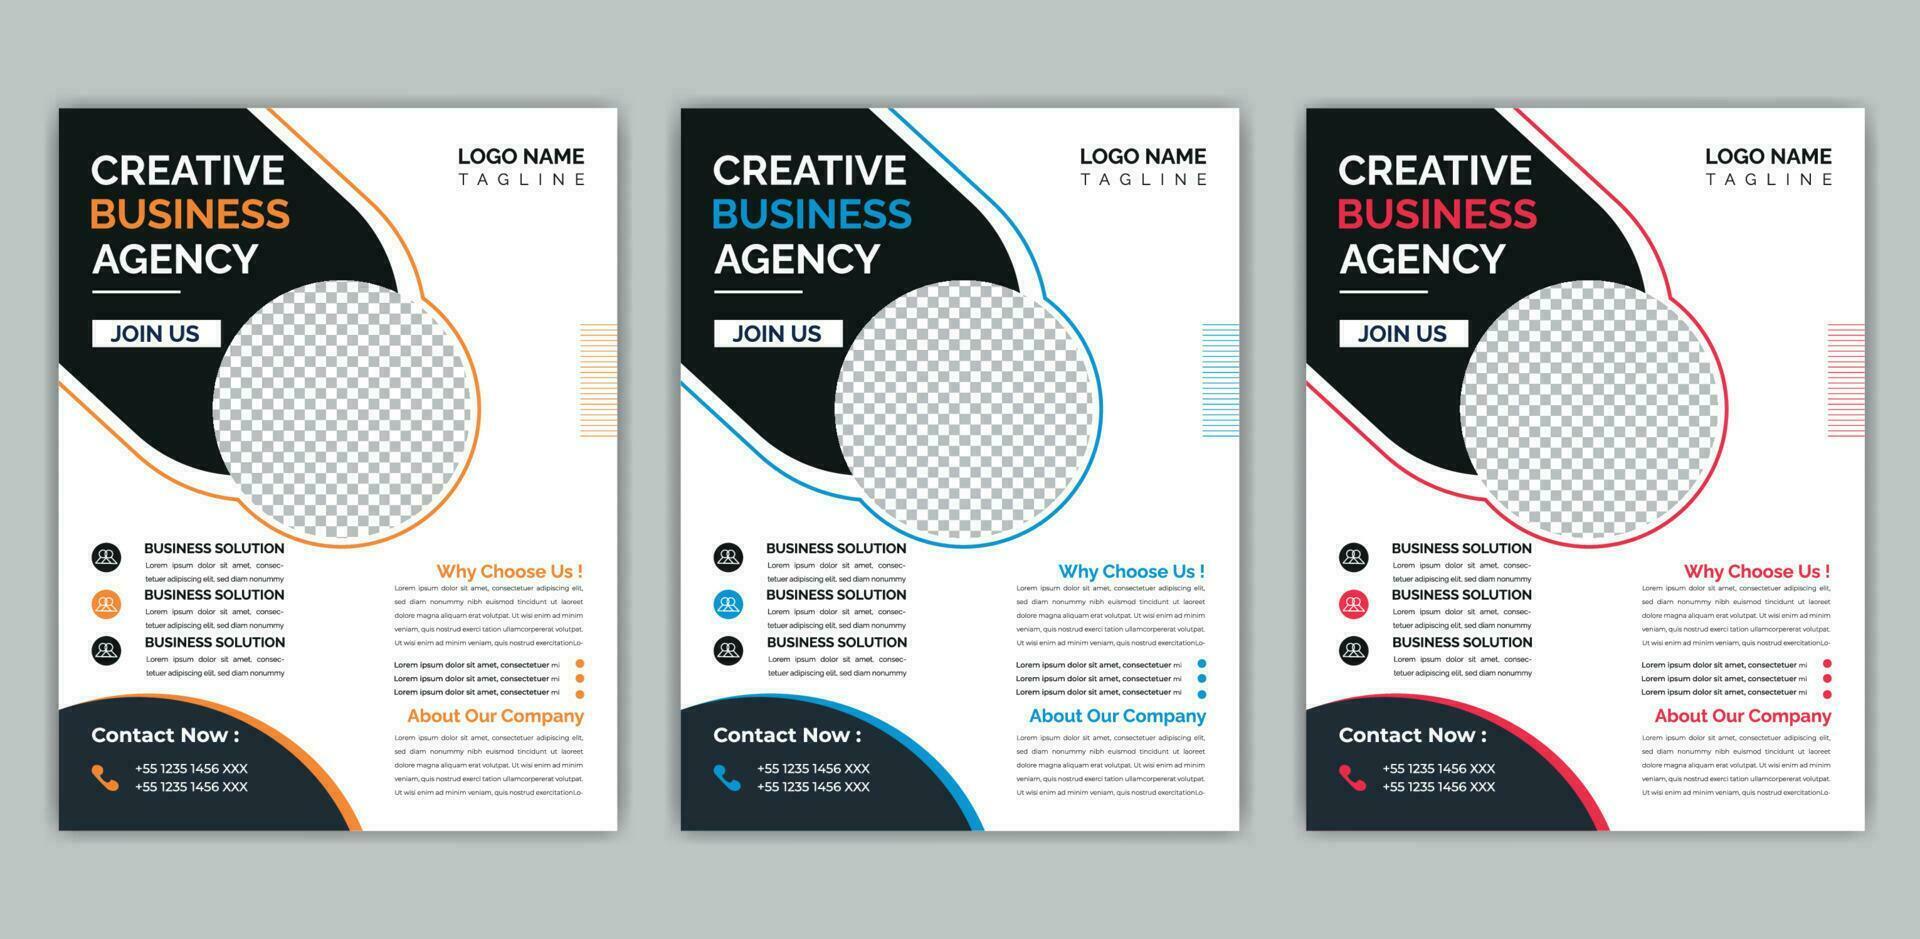 Creative business agency flyer template design . marketing, business proposal, promotion, advertise, publication, cover page. marketing social media post template. vector